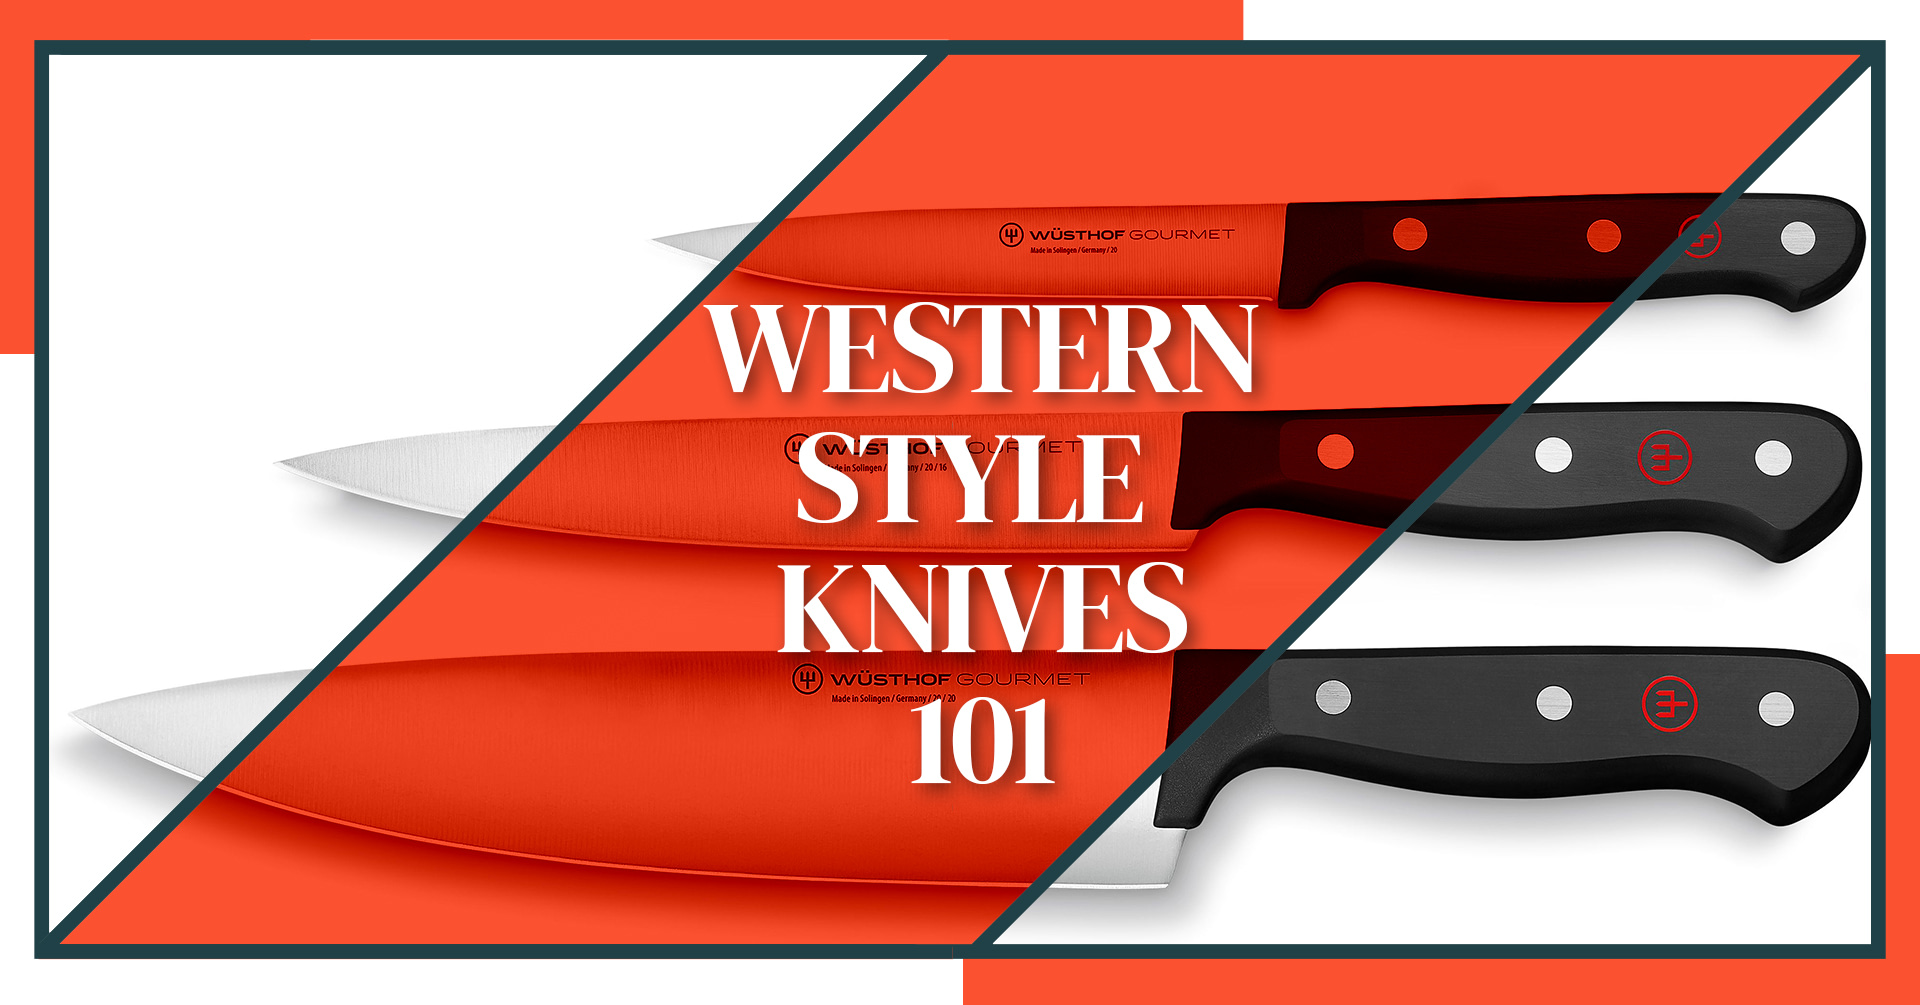 Western Style Knives 101